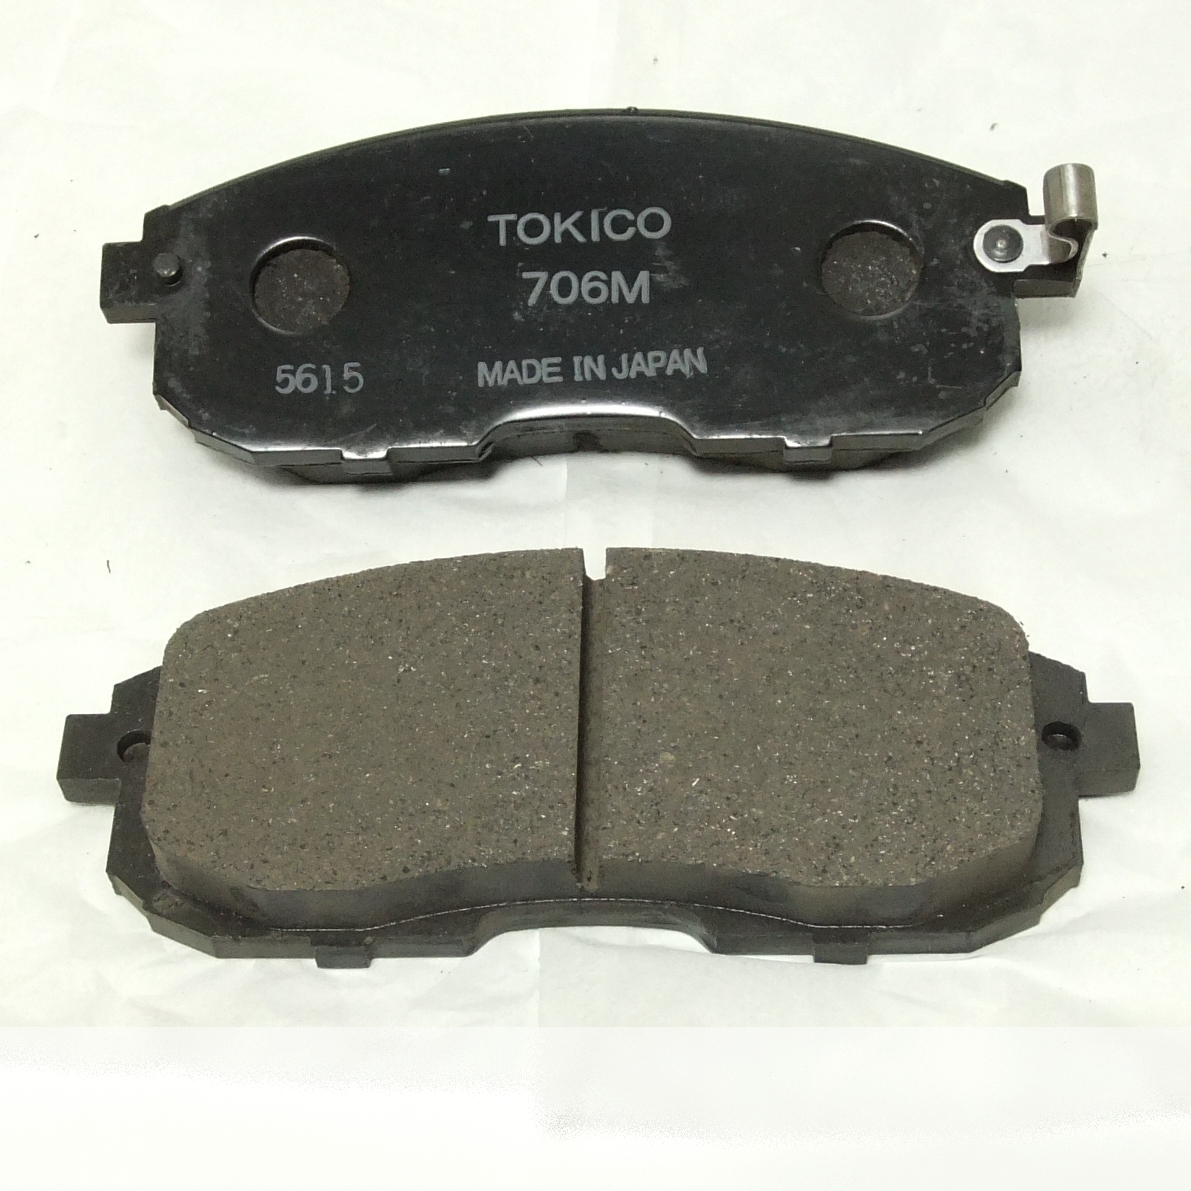  special price!* Tokico ( reality Hitachi ) original corresponding front pad [SX4(YA/YB/YC series ) *S-CROSS excepting all cars ]TN706M* postage = nationwide equal 520 jpy * prompt decision 